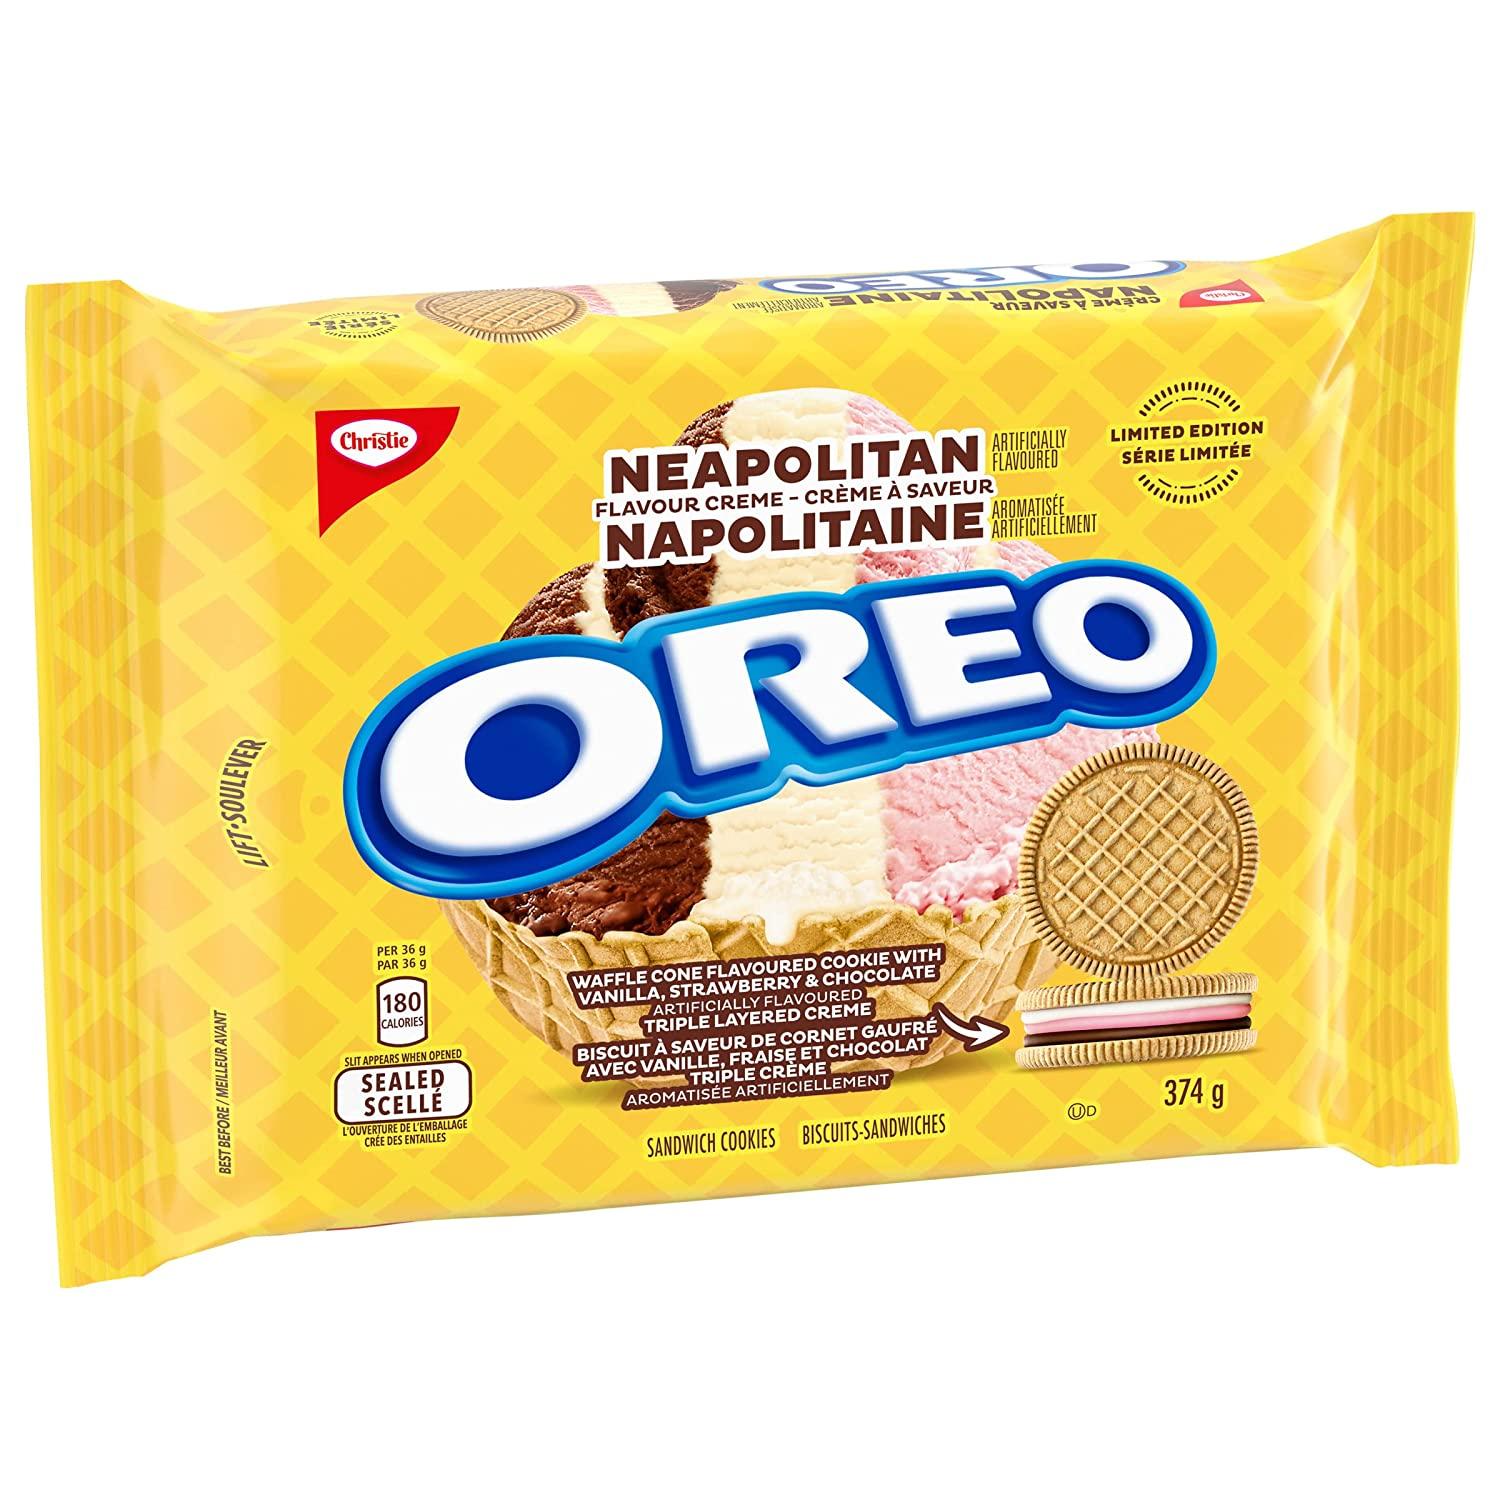 Oreo Neapolitan Flavor Crme Cookies, 374g/13.2 oz. Imported from Canada